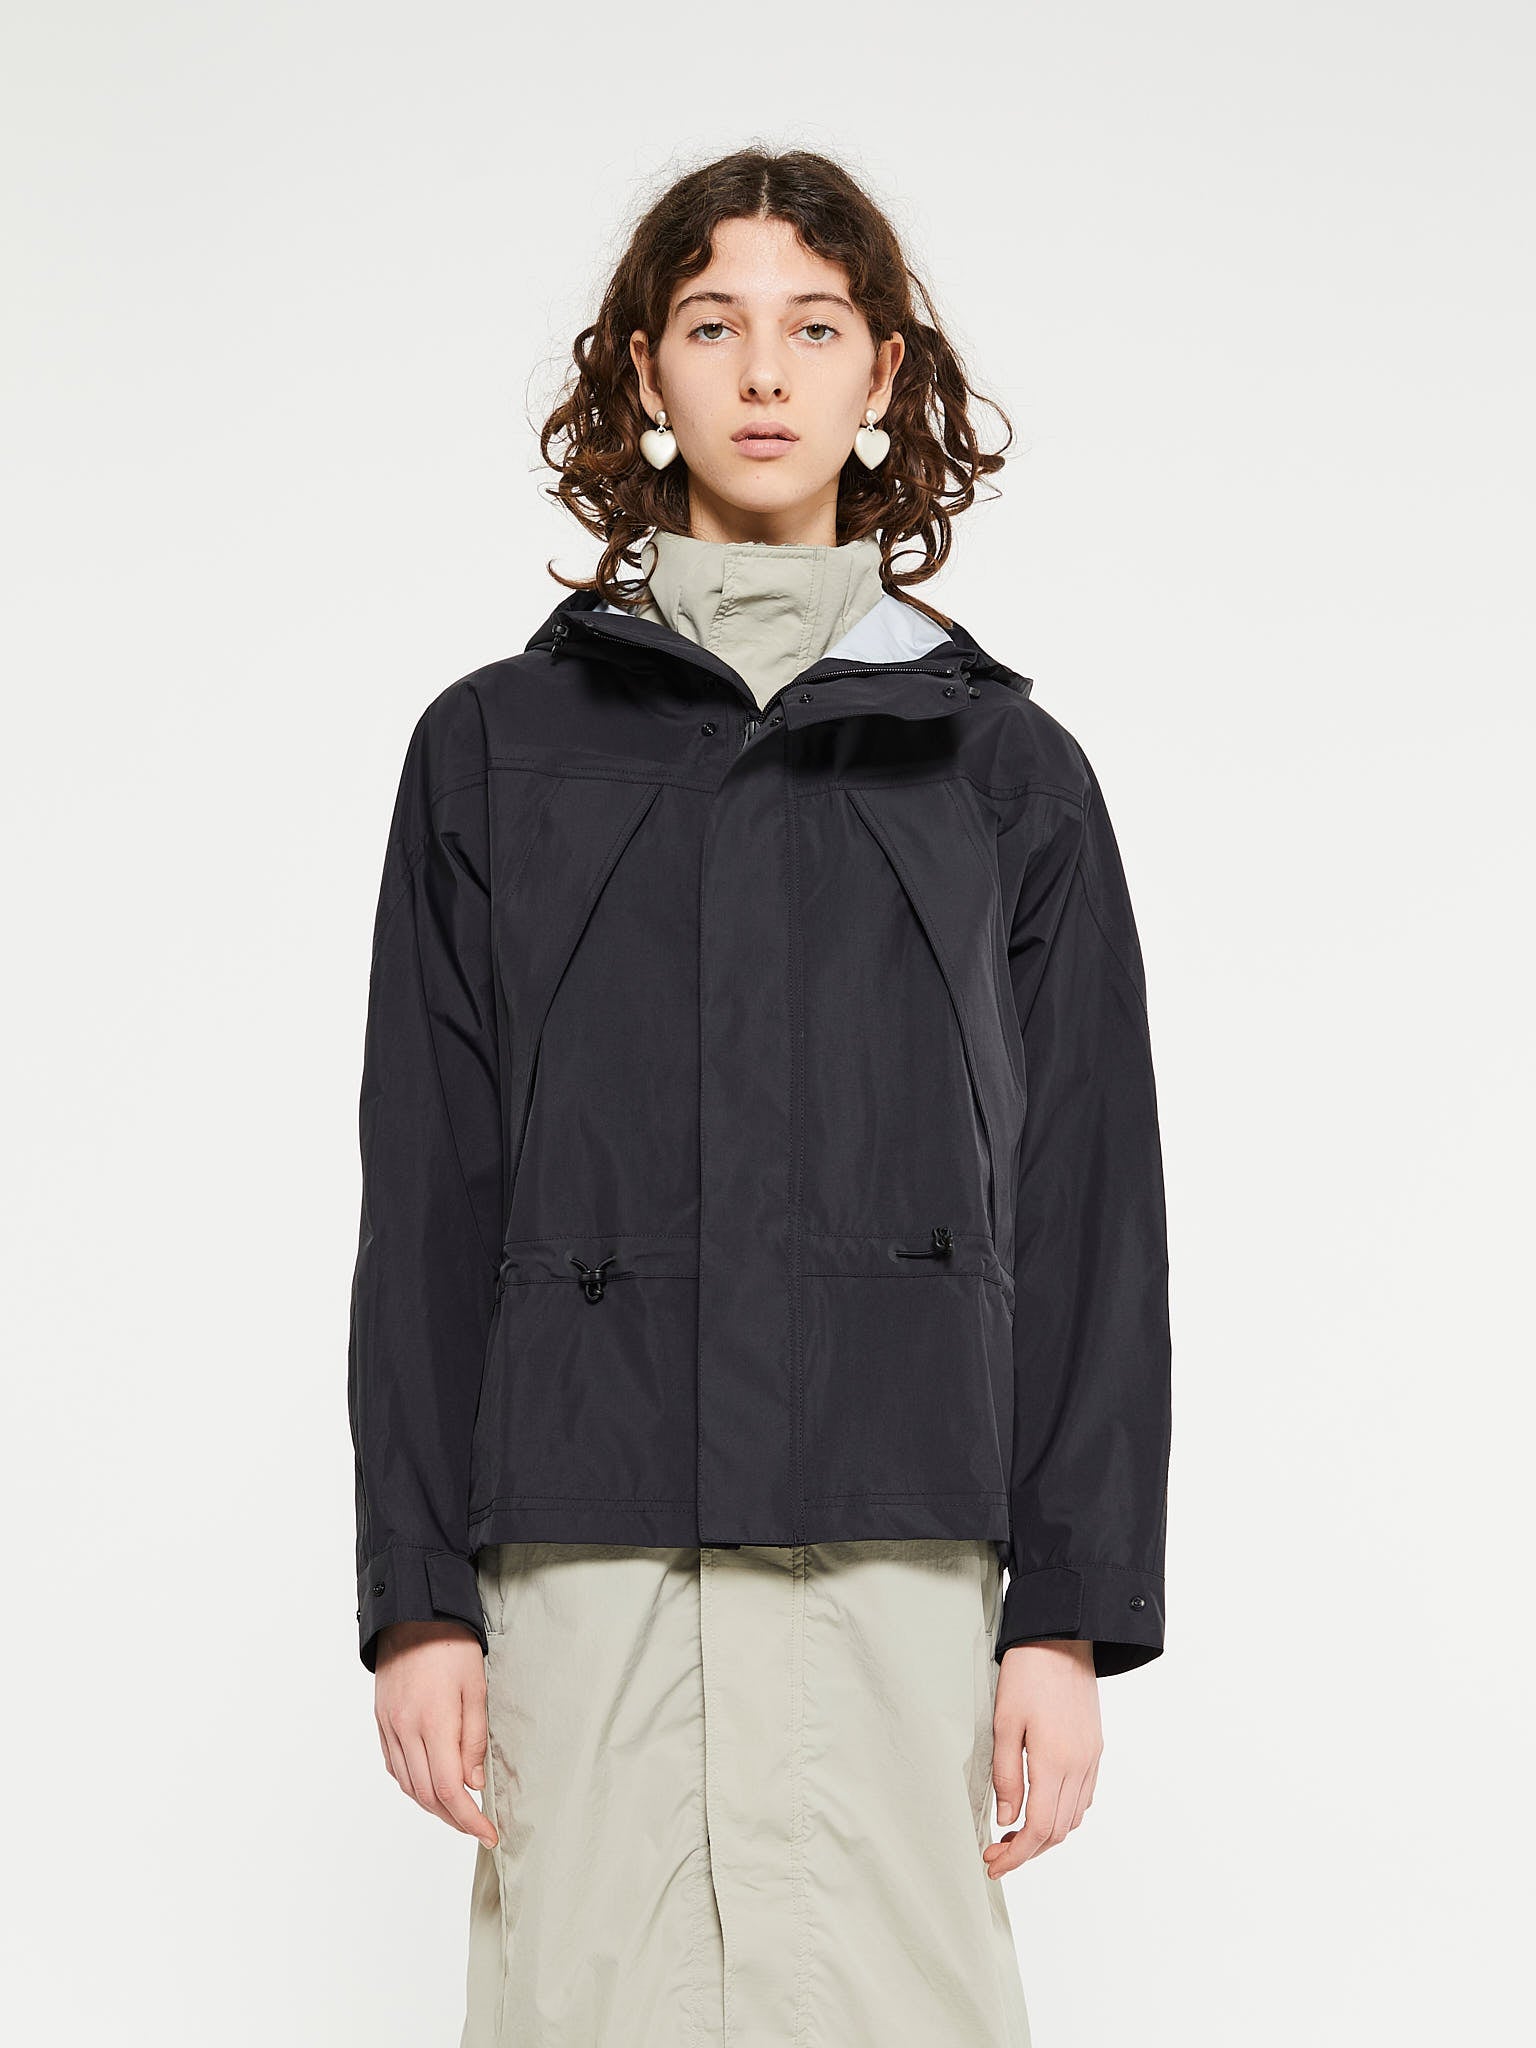 66 North - Laugardalur Jacket in Black